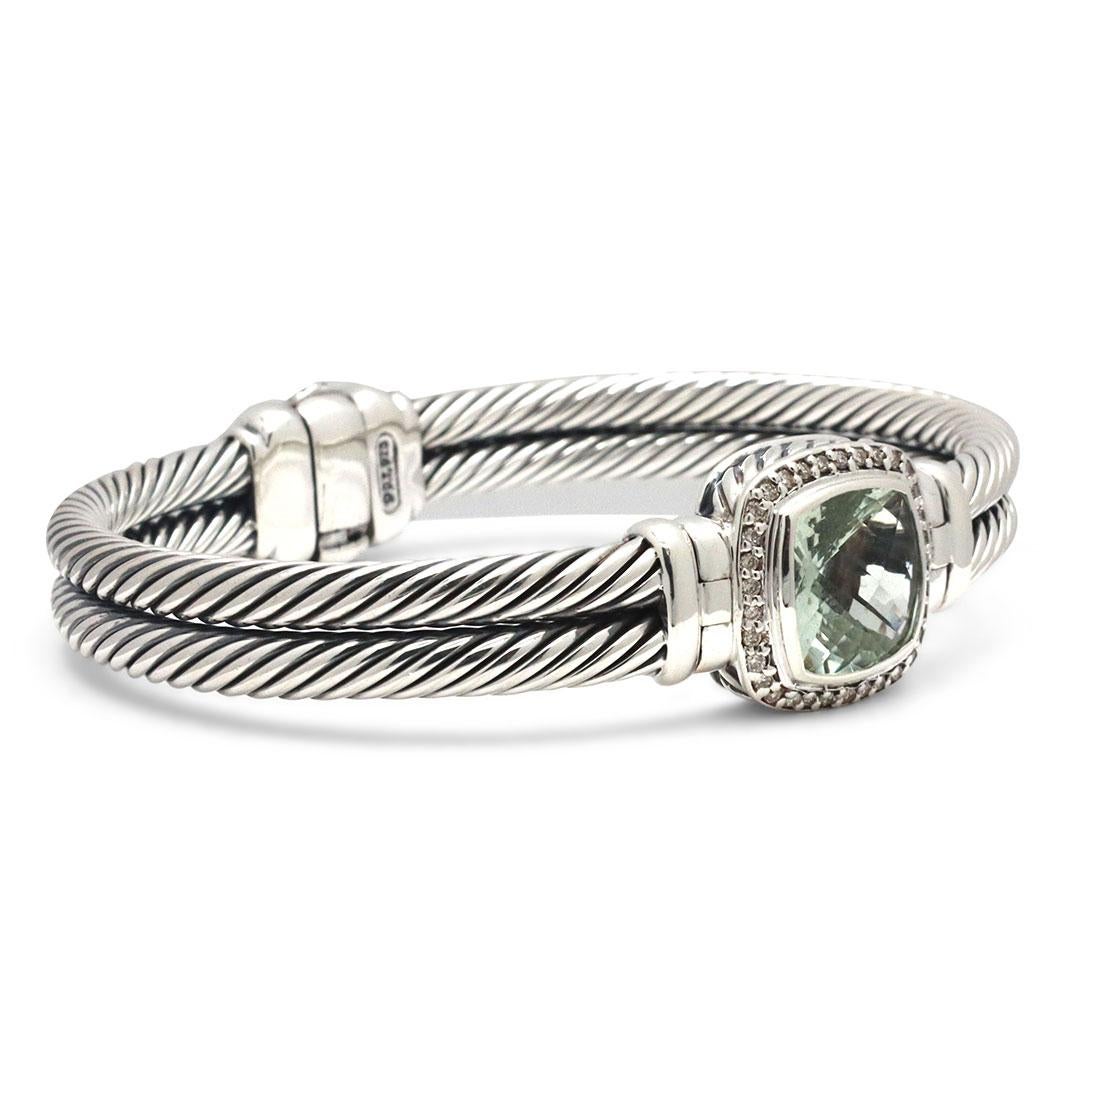 Authentic David Yurman bangle, crafted in sterling silver. The bracelet is set with one faceted prasiolite stone and approximately 0.26 carats of round brilliant cut diamonds around the main stone. Signed D.Y, 925 The bangle is a US size 5 1/4 and